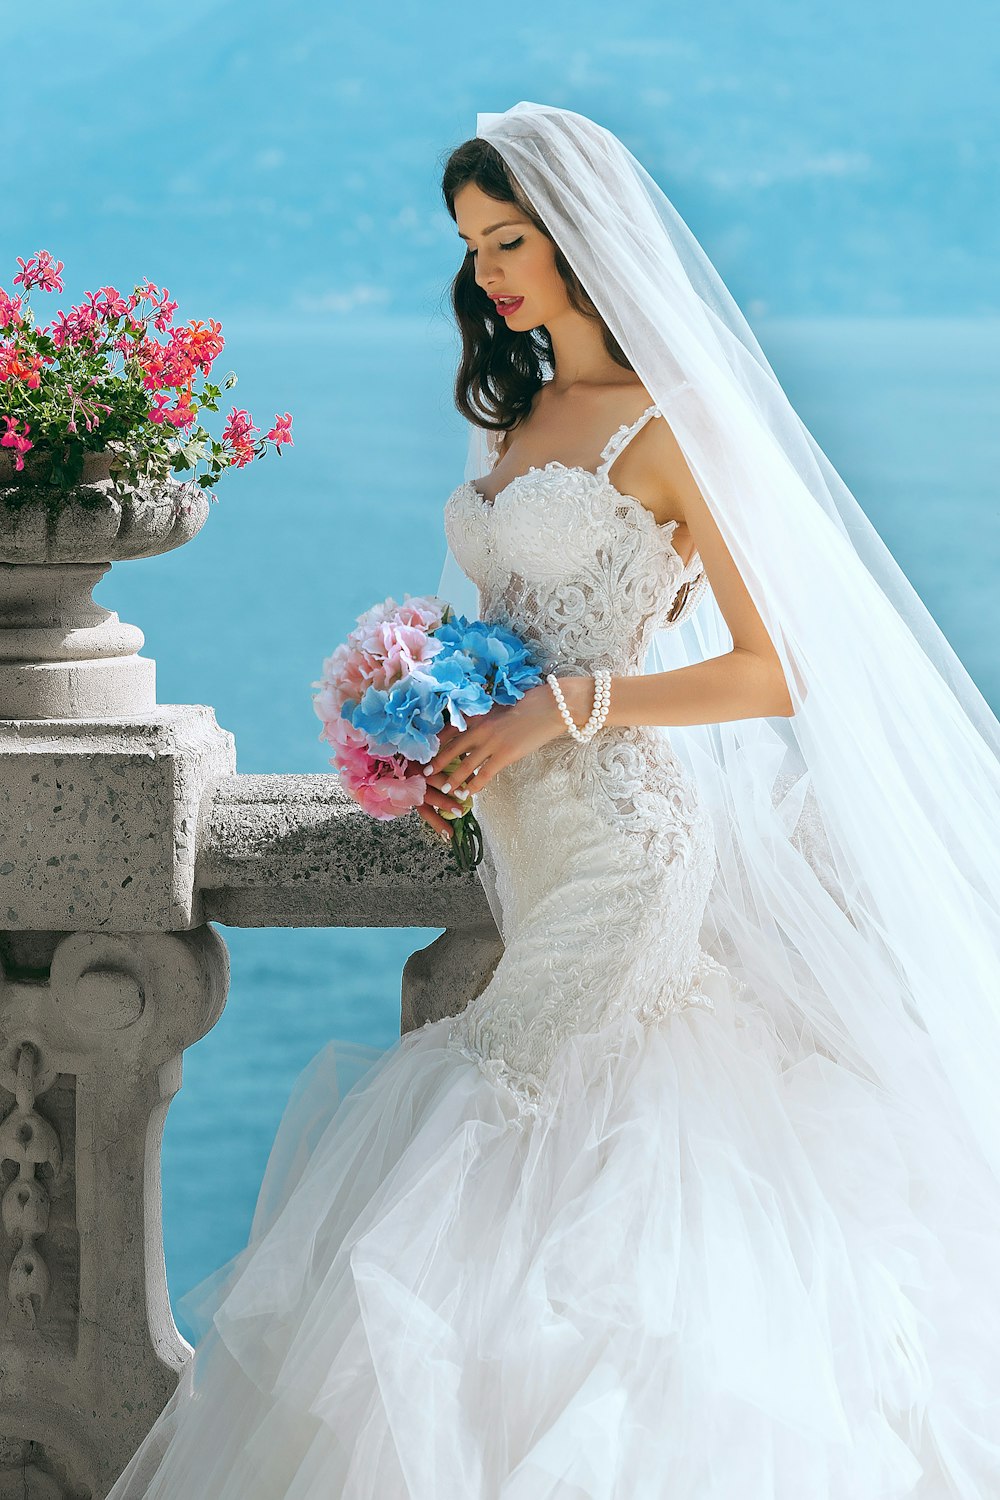 350+ Bride Pictures [HD] | Download Free Images & Stock 